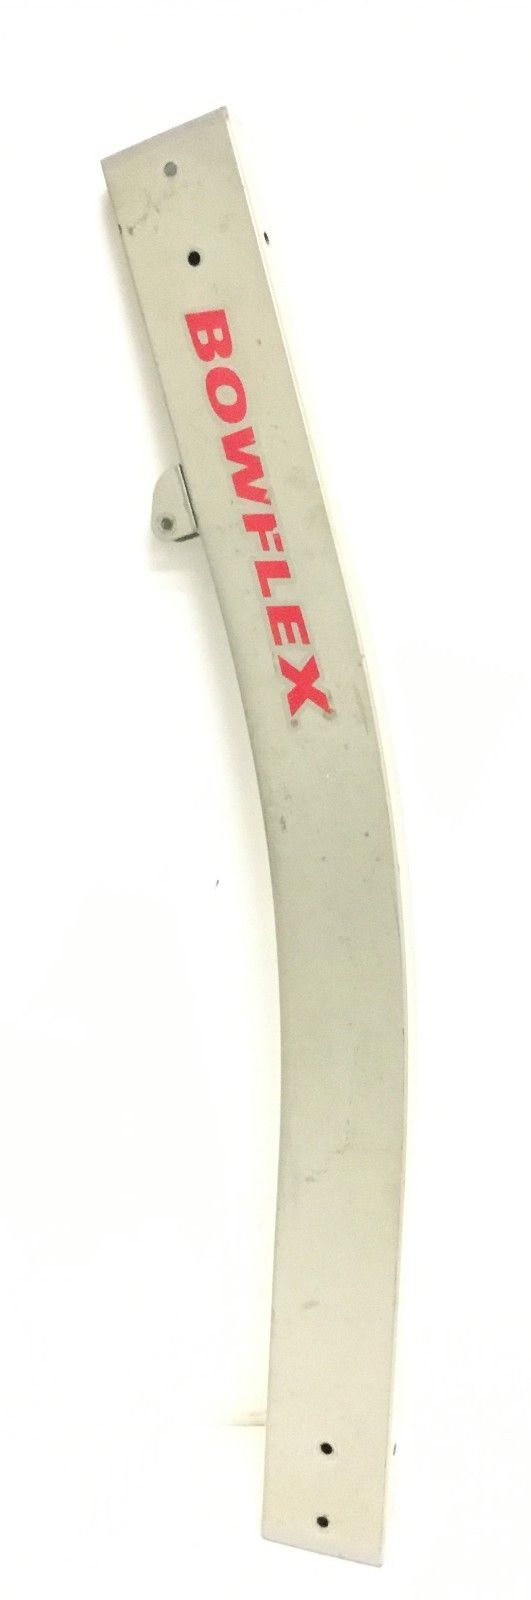 Right Upright With Decal (Used)